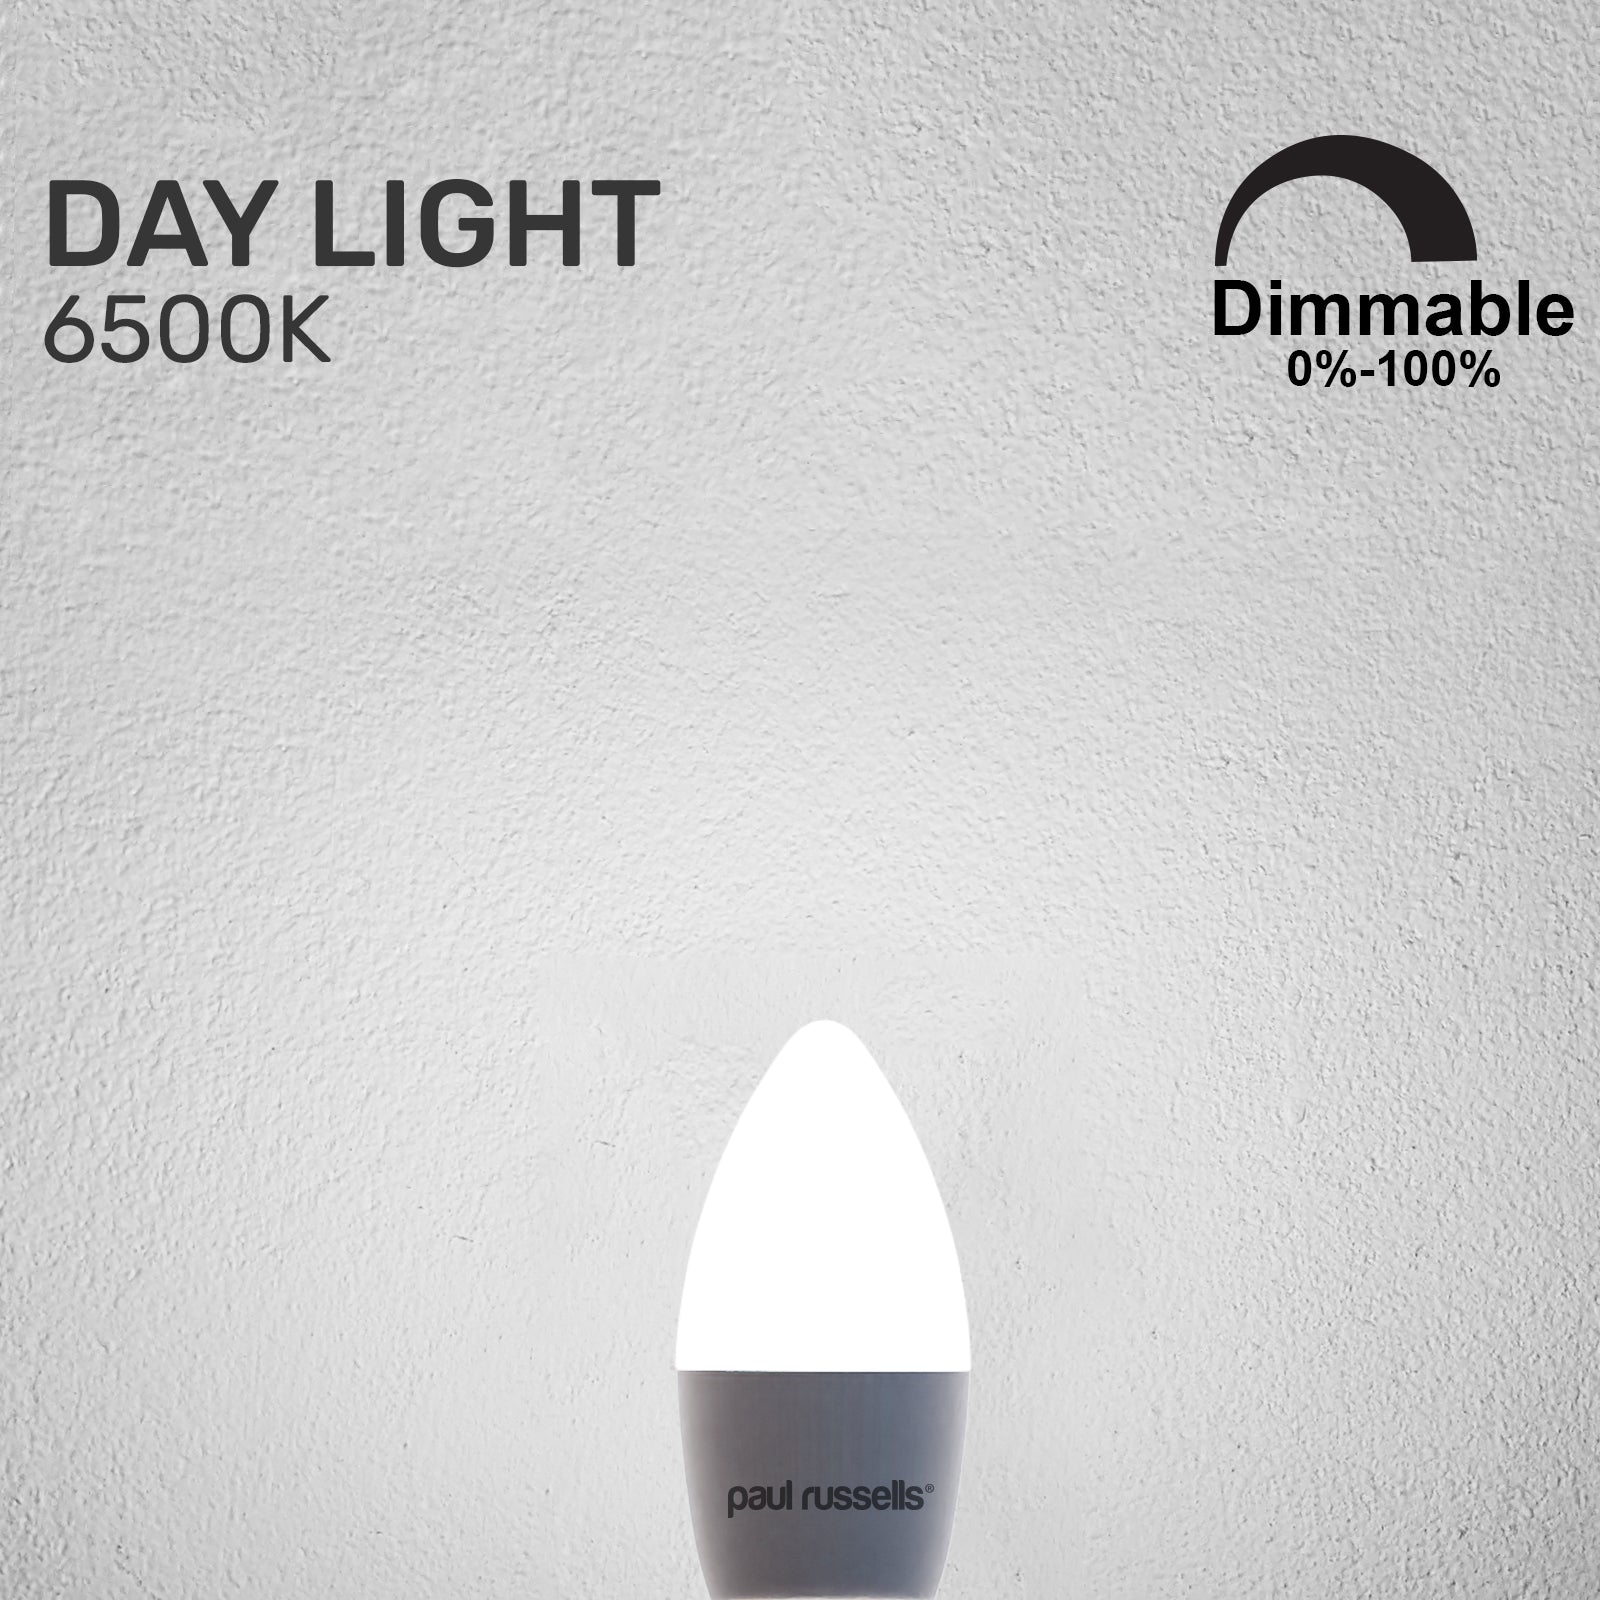 LED Dimmable Candle 5.5W (40w), BC/B22, 470 Lumens, Day Light(6500K), 240V